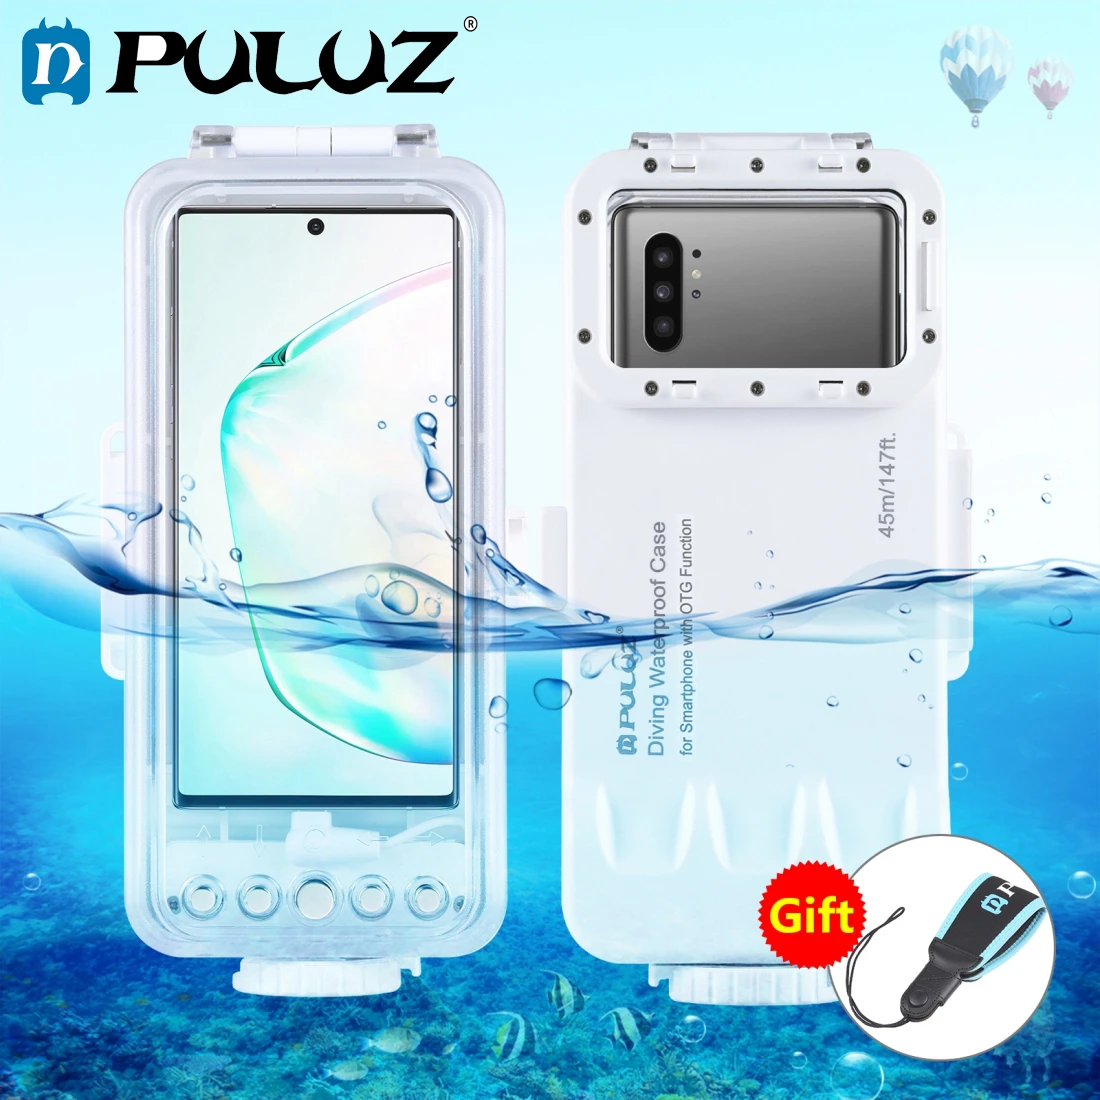 PULUZ 45m/147ft Waterproof Diving Housing Photo Video Taking Underwater Cover Case For iphone,Galaxy,Android Smartphone with OTG